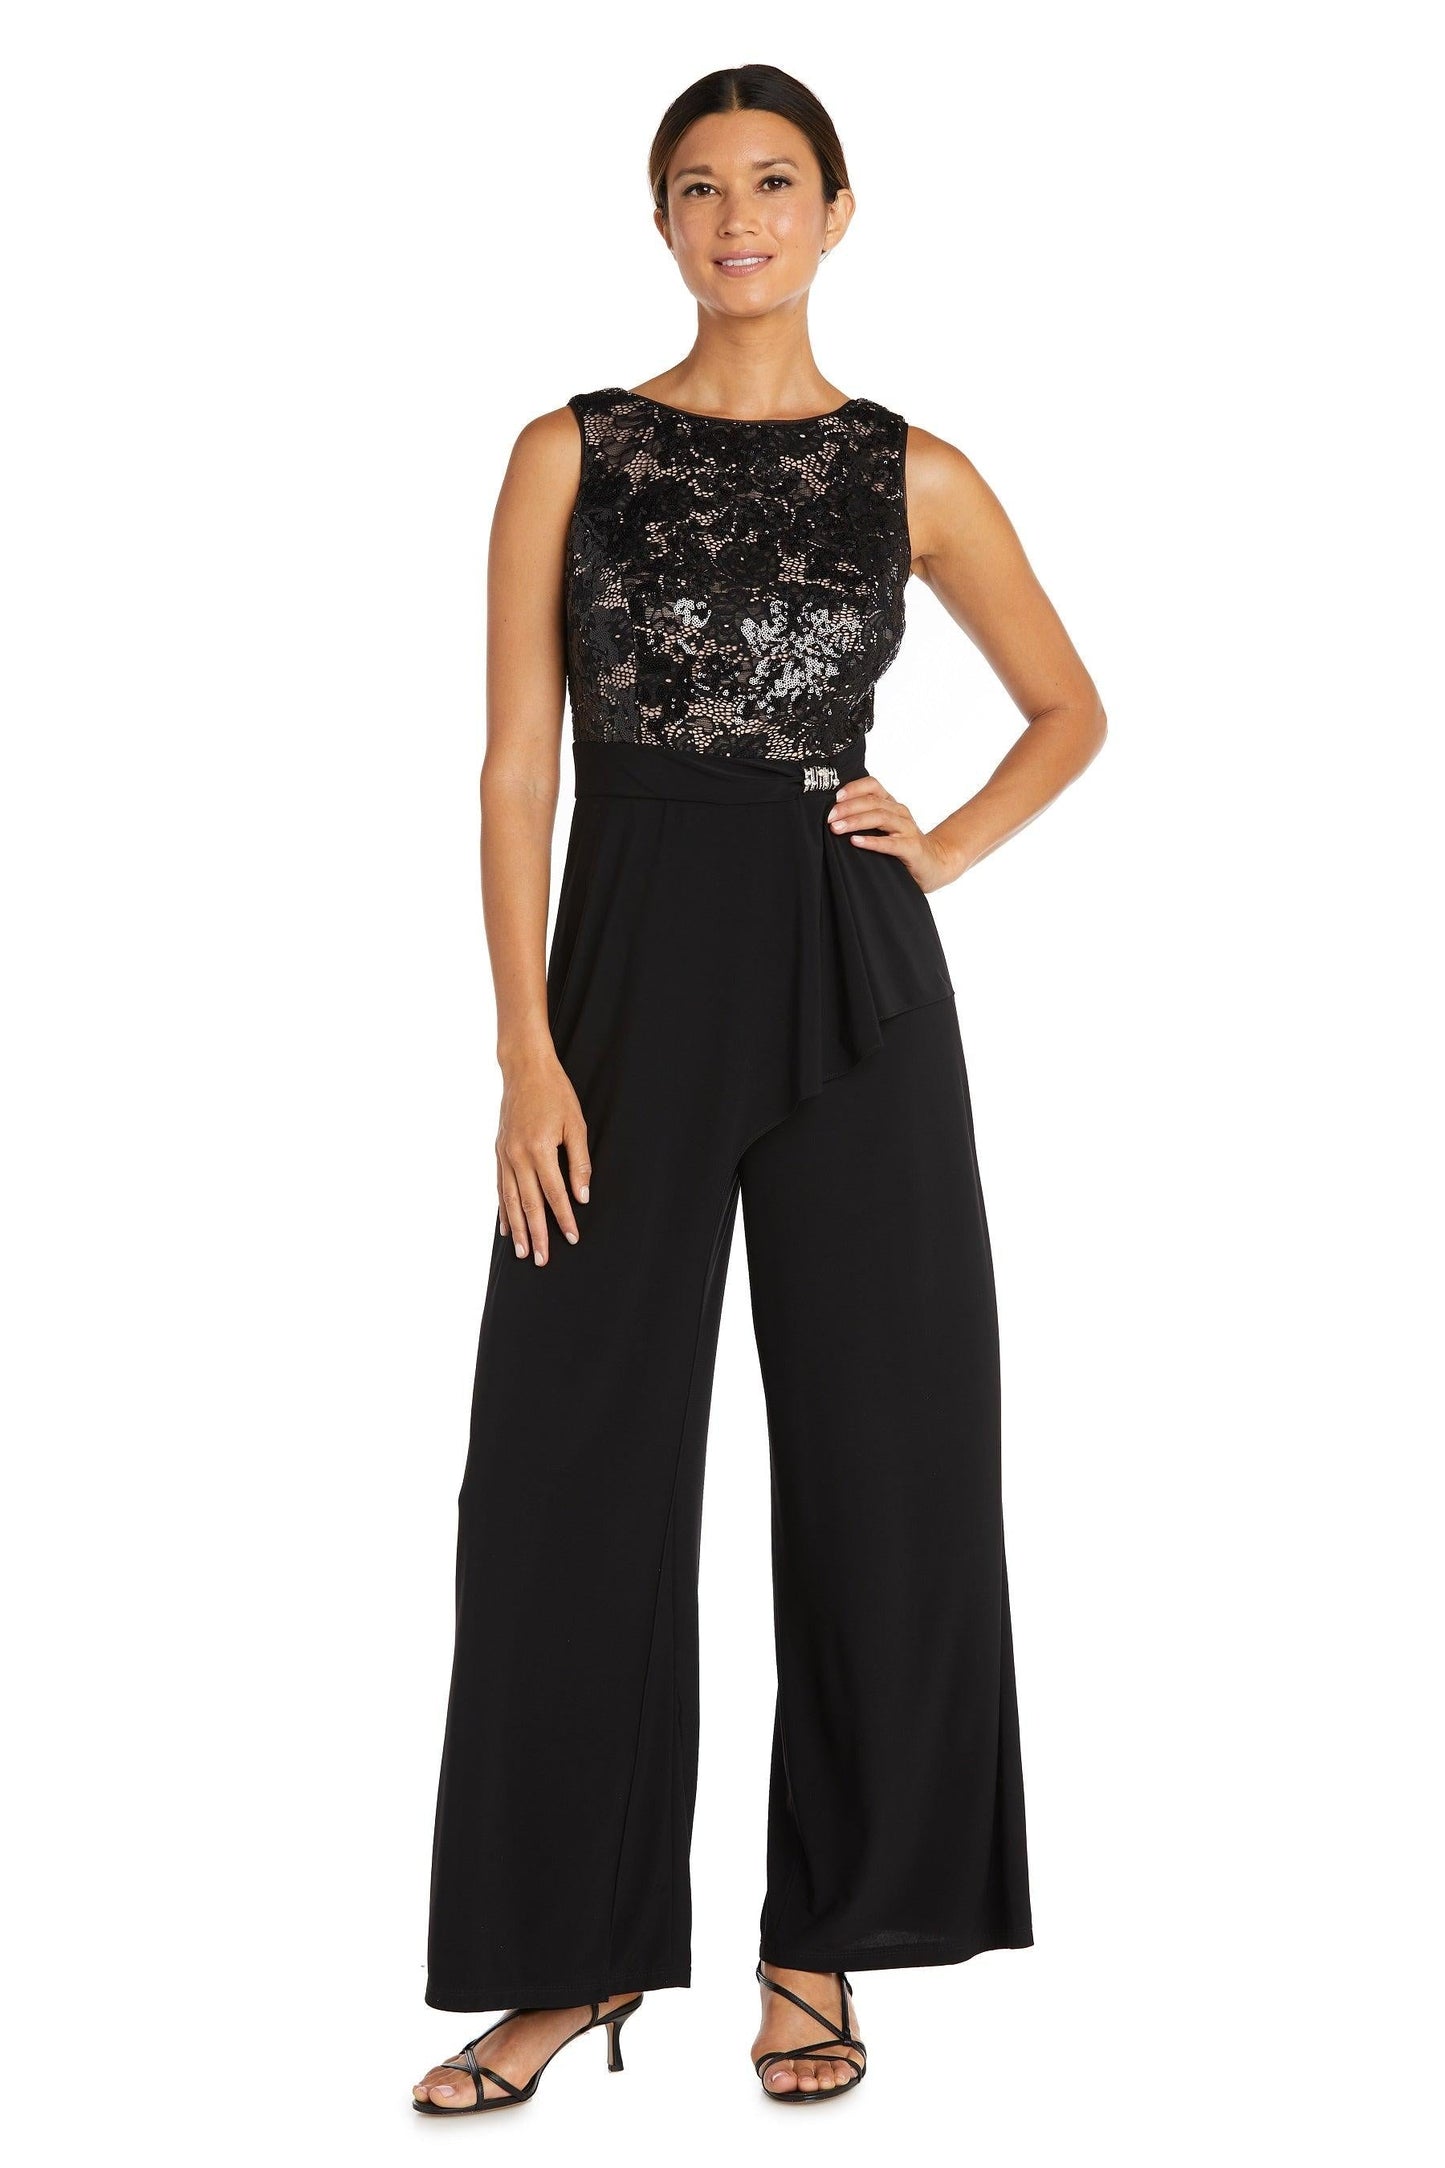 R&M Richards Formal Sleeveless Petite Jumpsuit 9054P - The Dress Outlet